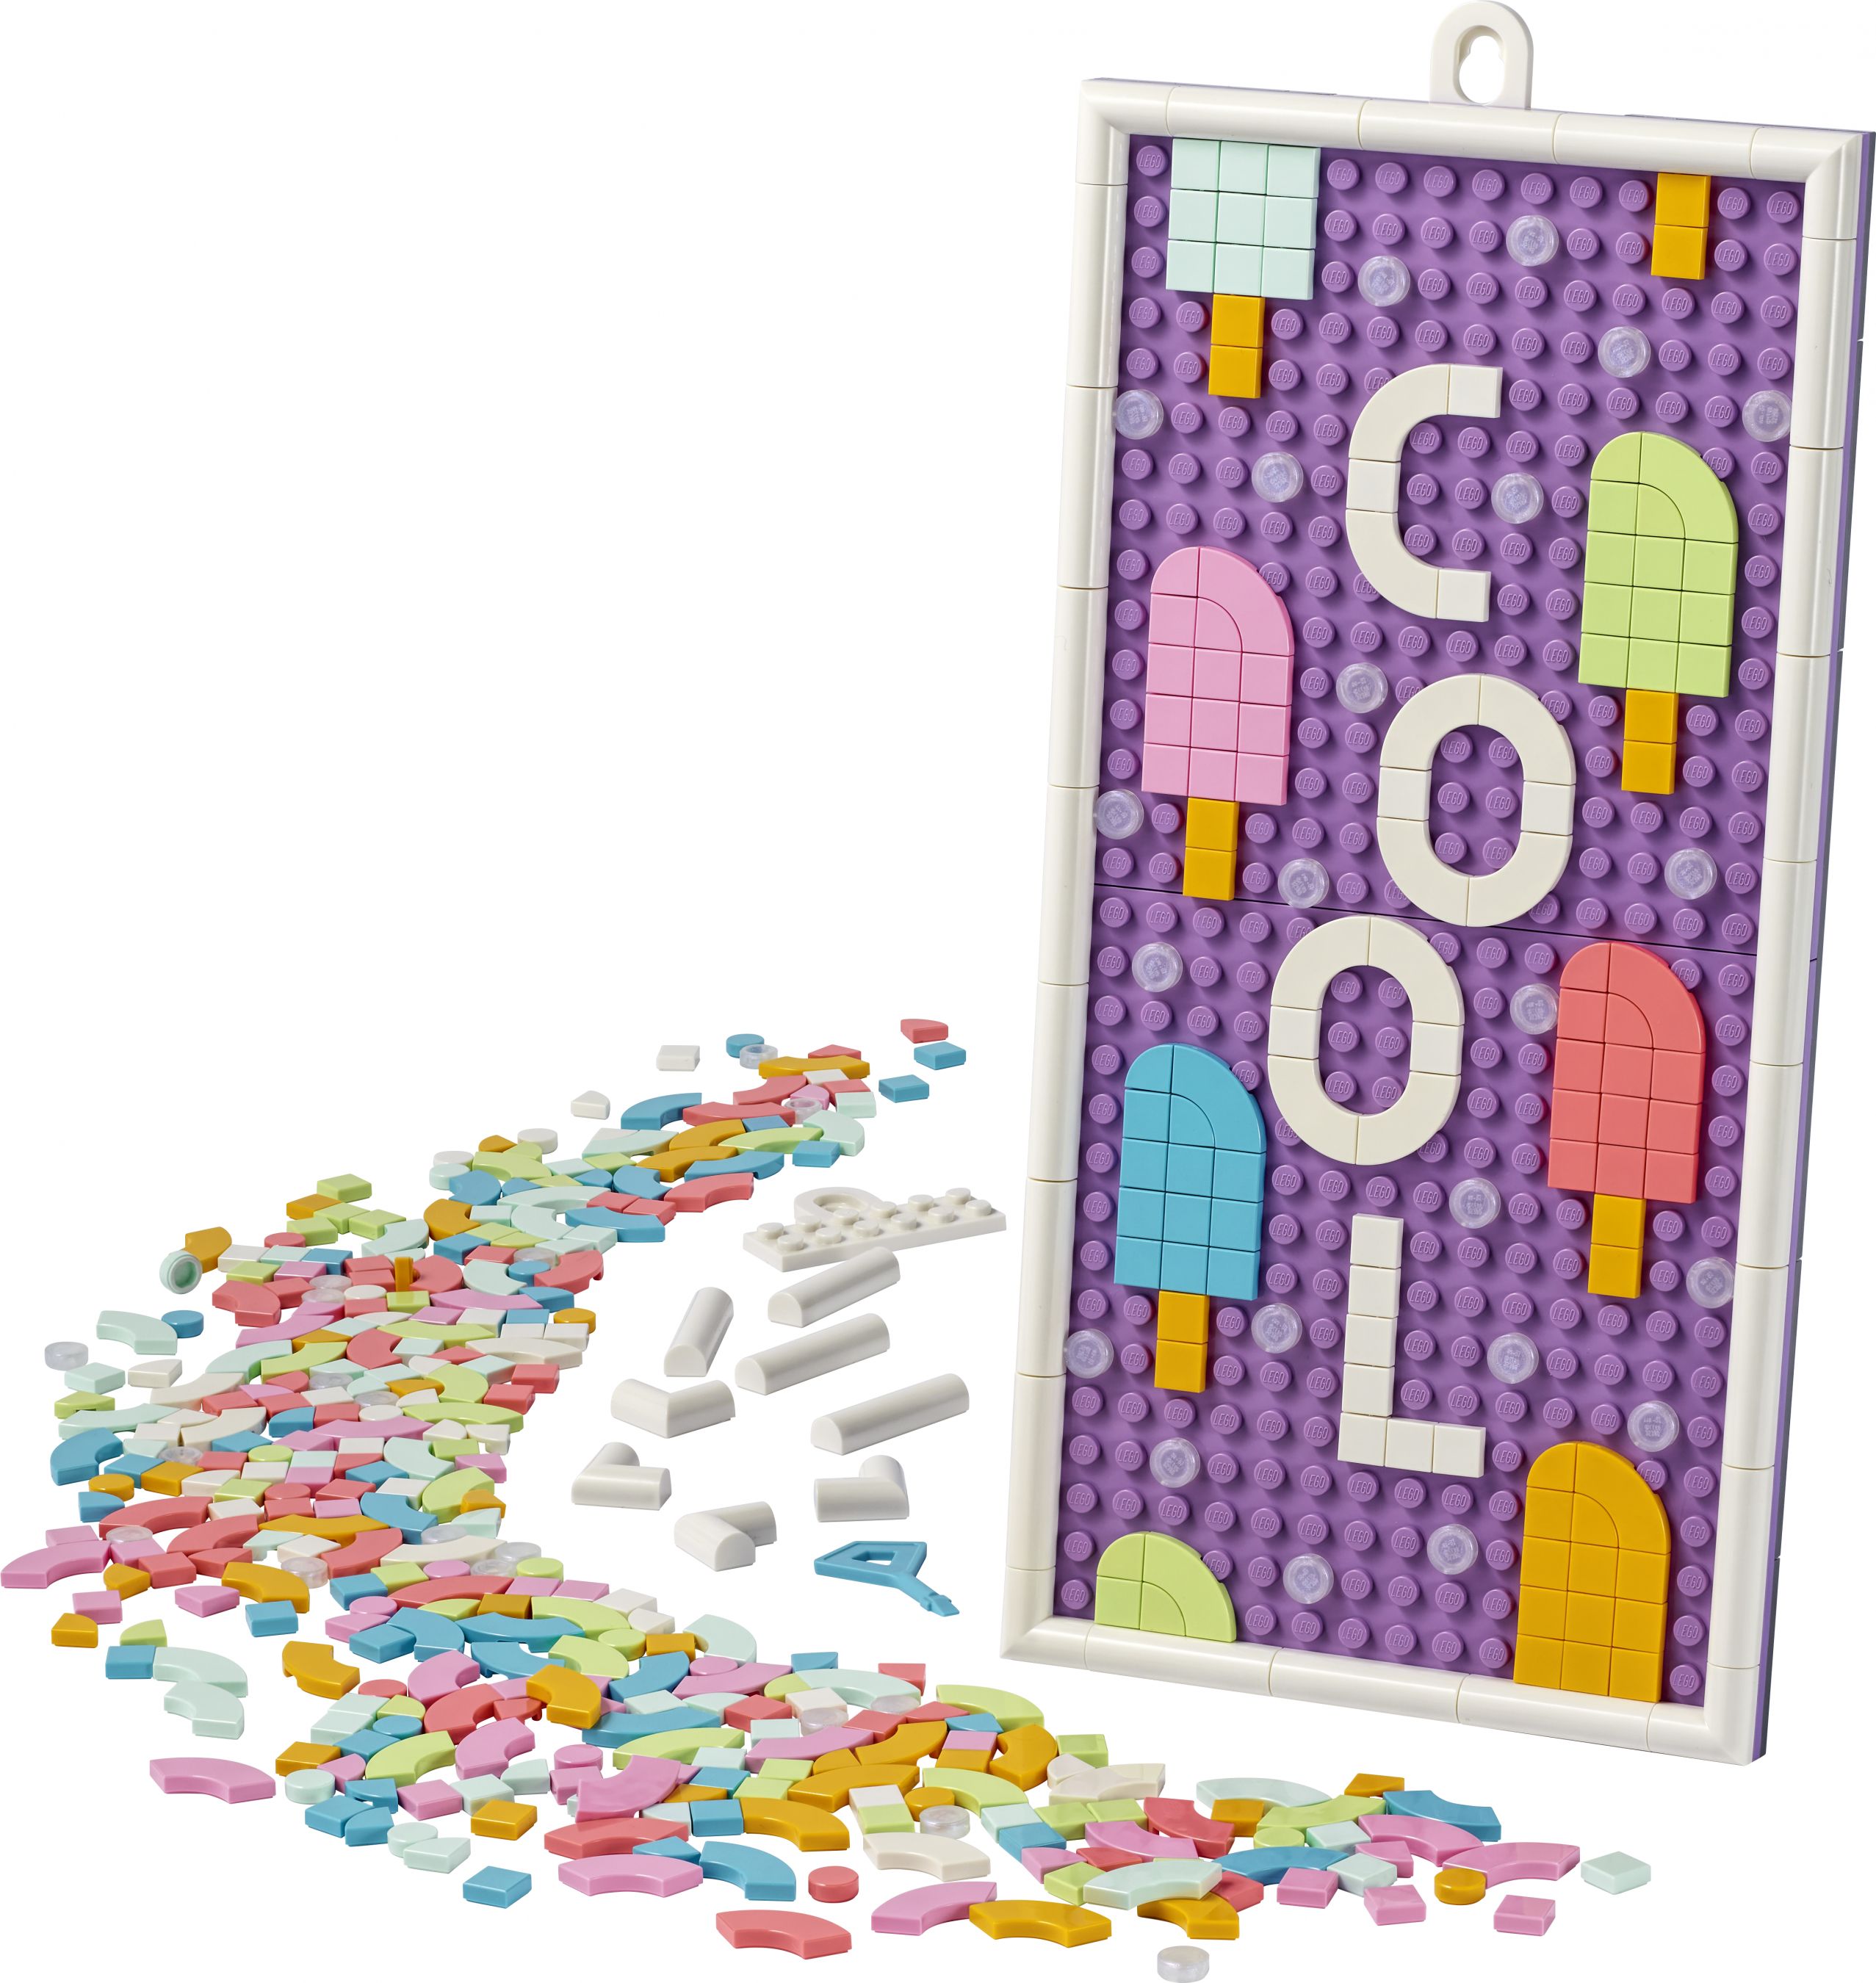 LEGO Dots 41951 Message Board